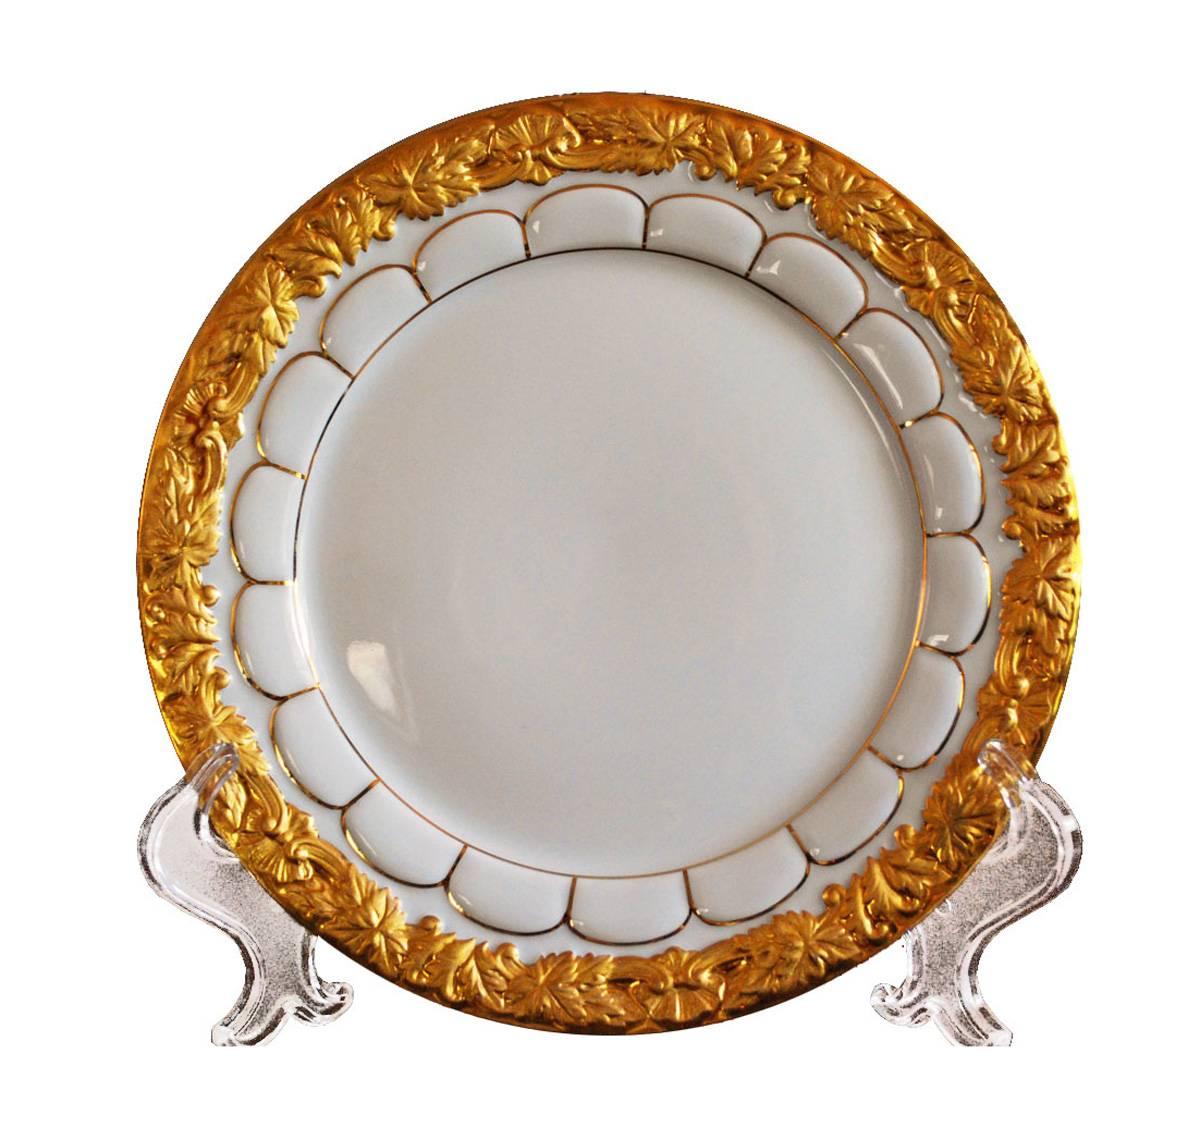 This elegant Meissen set displays a perfect balance of simplicity and adornment. The crisp white porcelain is offset by thin gold bands contouring the lobed form. Rims feature acanthus motif decorated with both matte and glossy 24-karat gold. Each